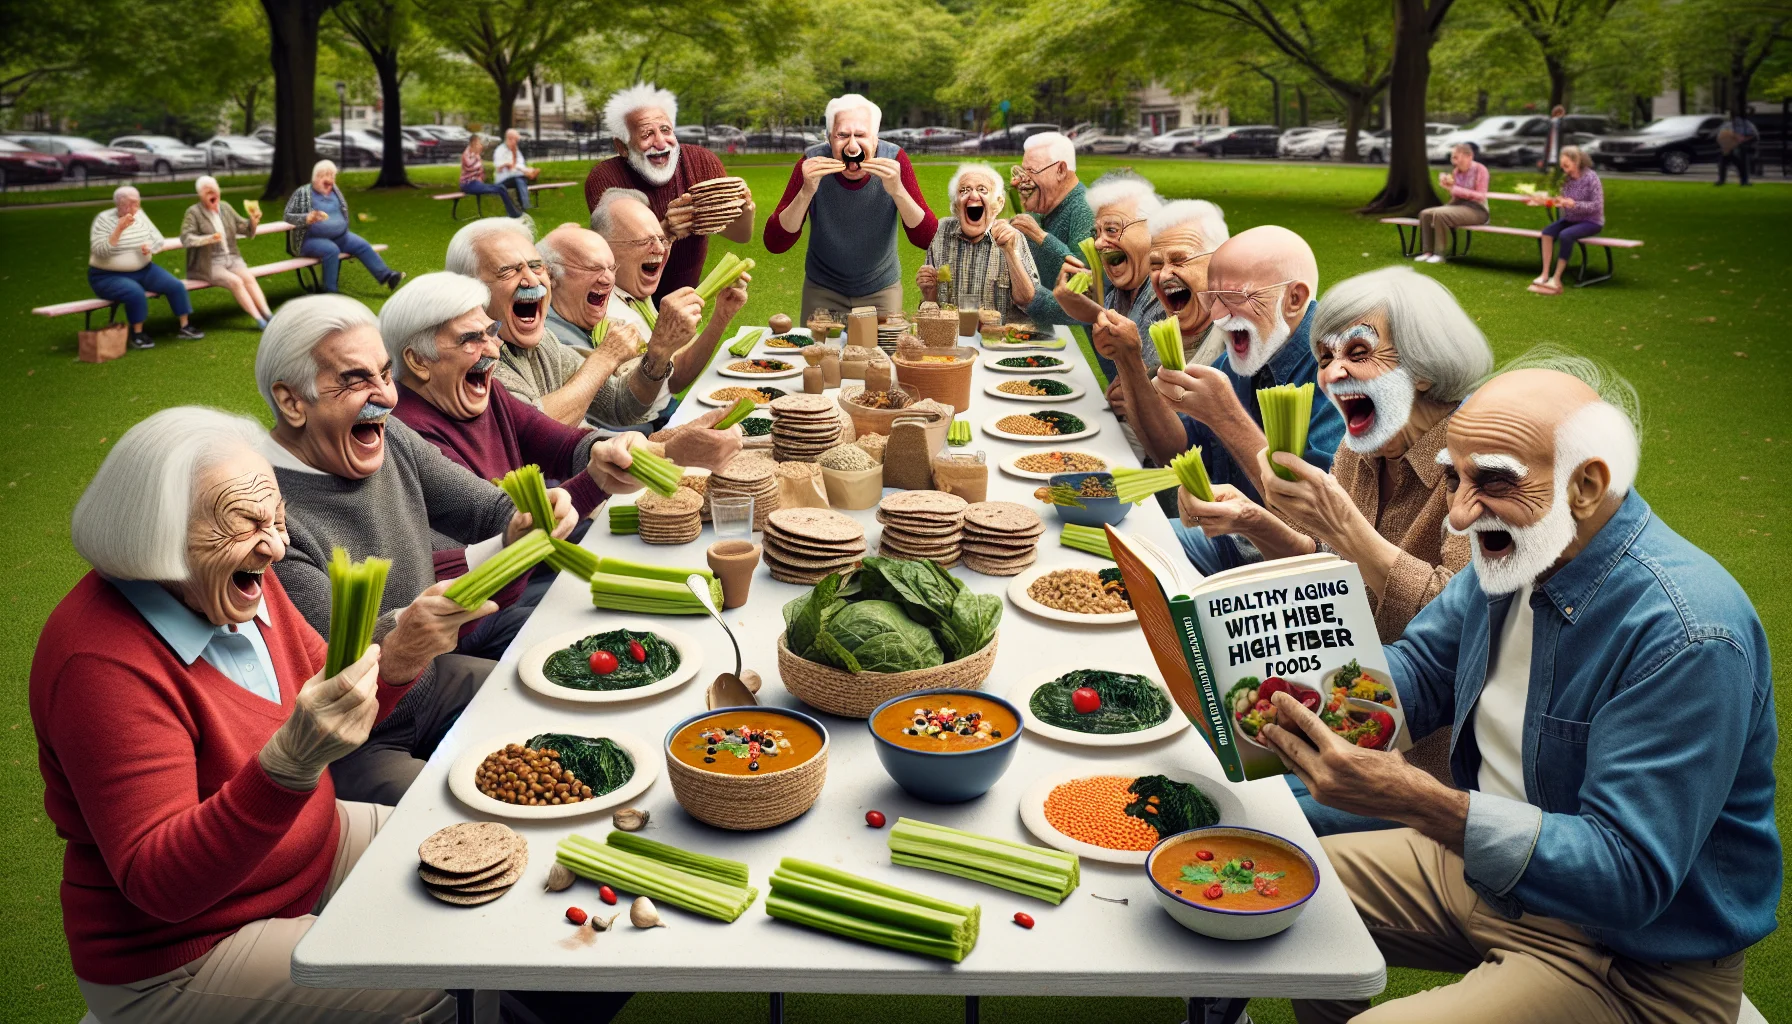 Create a humorous, realistic scene set in a park during daytime, where a group of elderly people of various descents like Caucasian, Hispanic, Middle-Eastern, and South Asian, are having a lively picnic. They are heartily laughing while trying to balance whole grain rotis (Indian bread) on their noses. The picnic table is overloaded with high fiber Indian foods such as lentil soup, chickpea curry, and sautéed spinach. A few of them are amusingly pretending to fight with celery sticks, while others are reading a diet book titled 'Healthy Aging with High Fiber Foods' and breaking into fits of laughter.